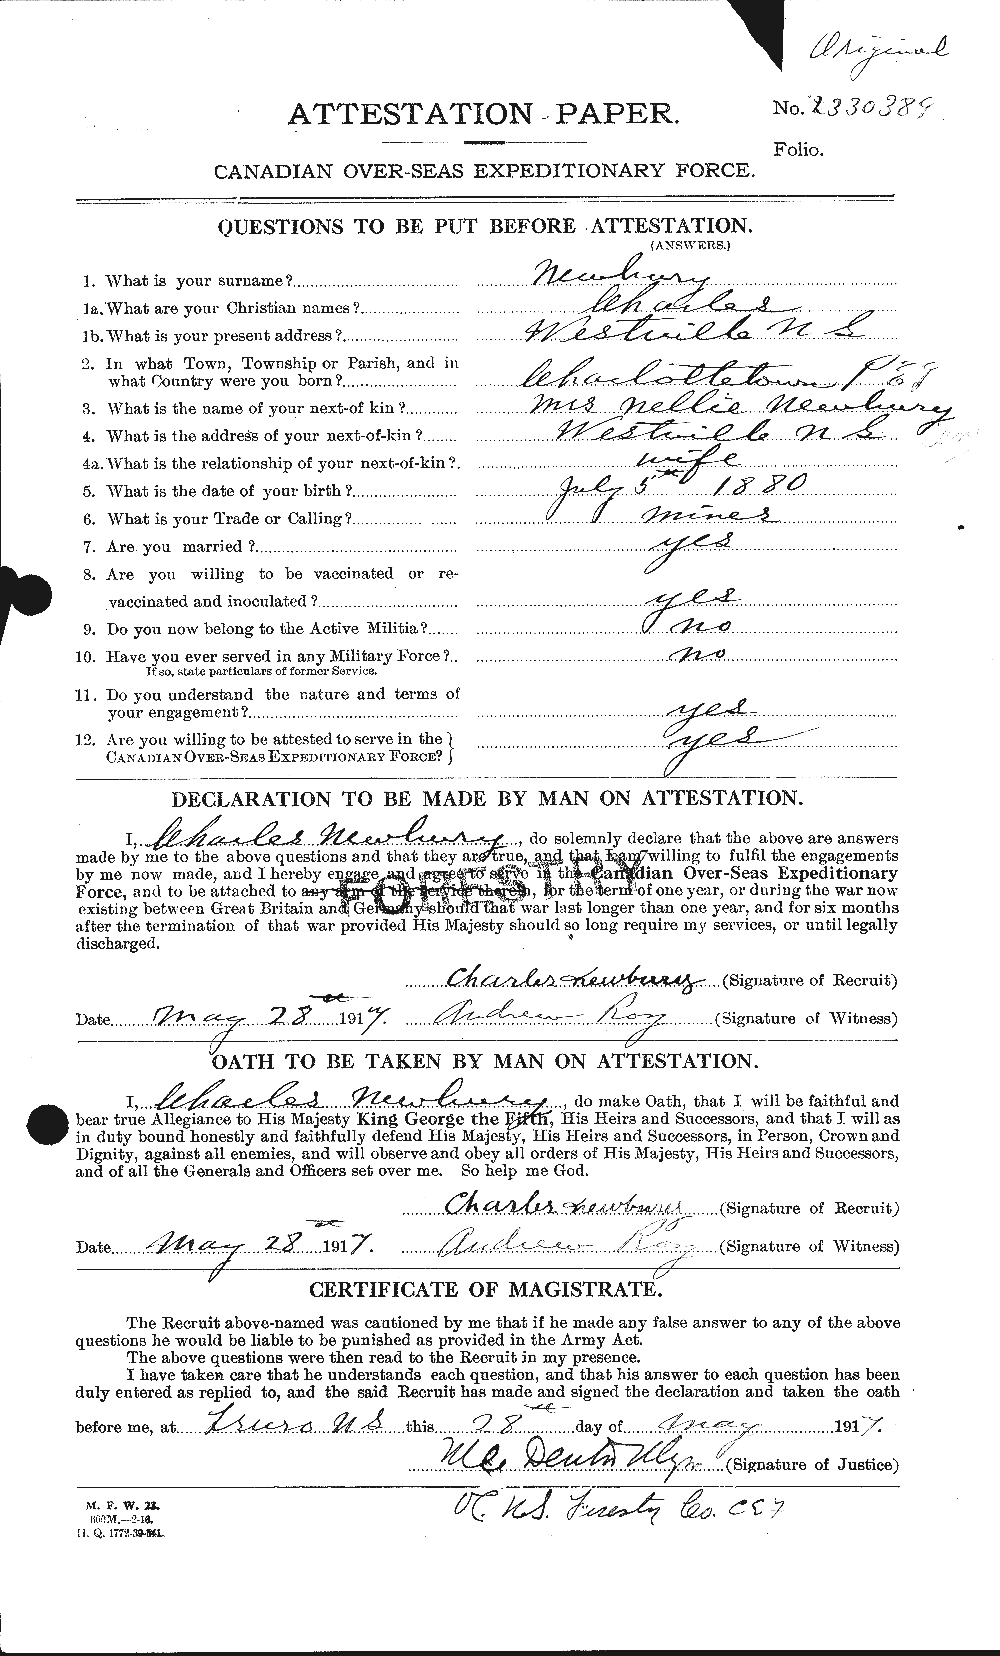 Personnel Records of the First World War - CEF 544114a